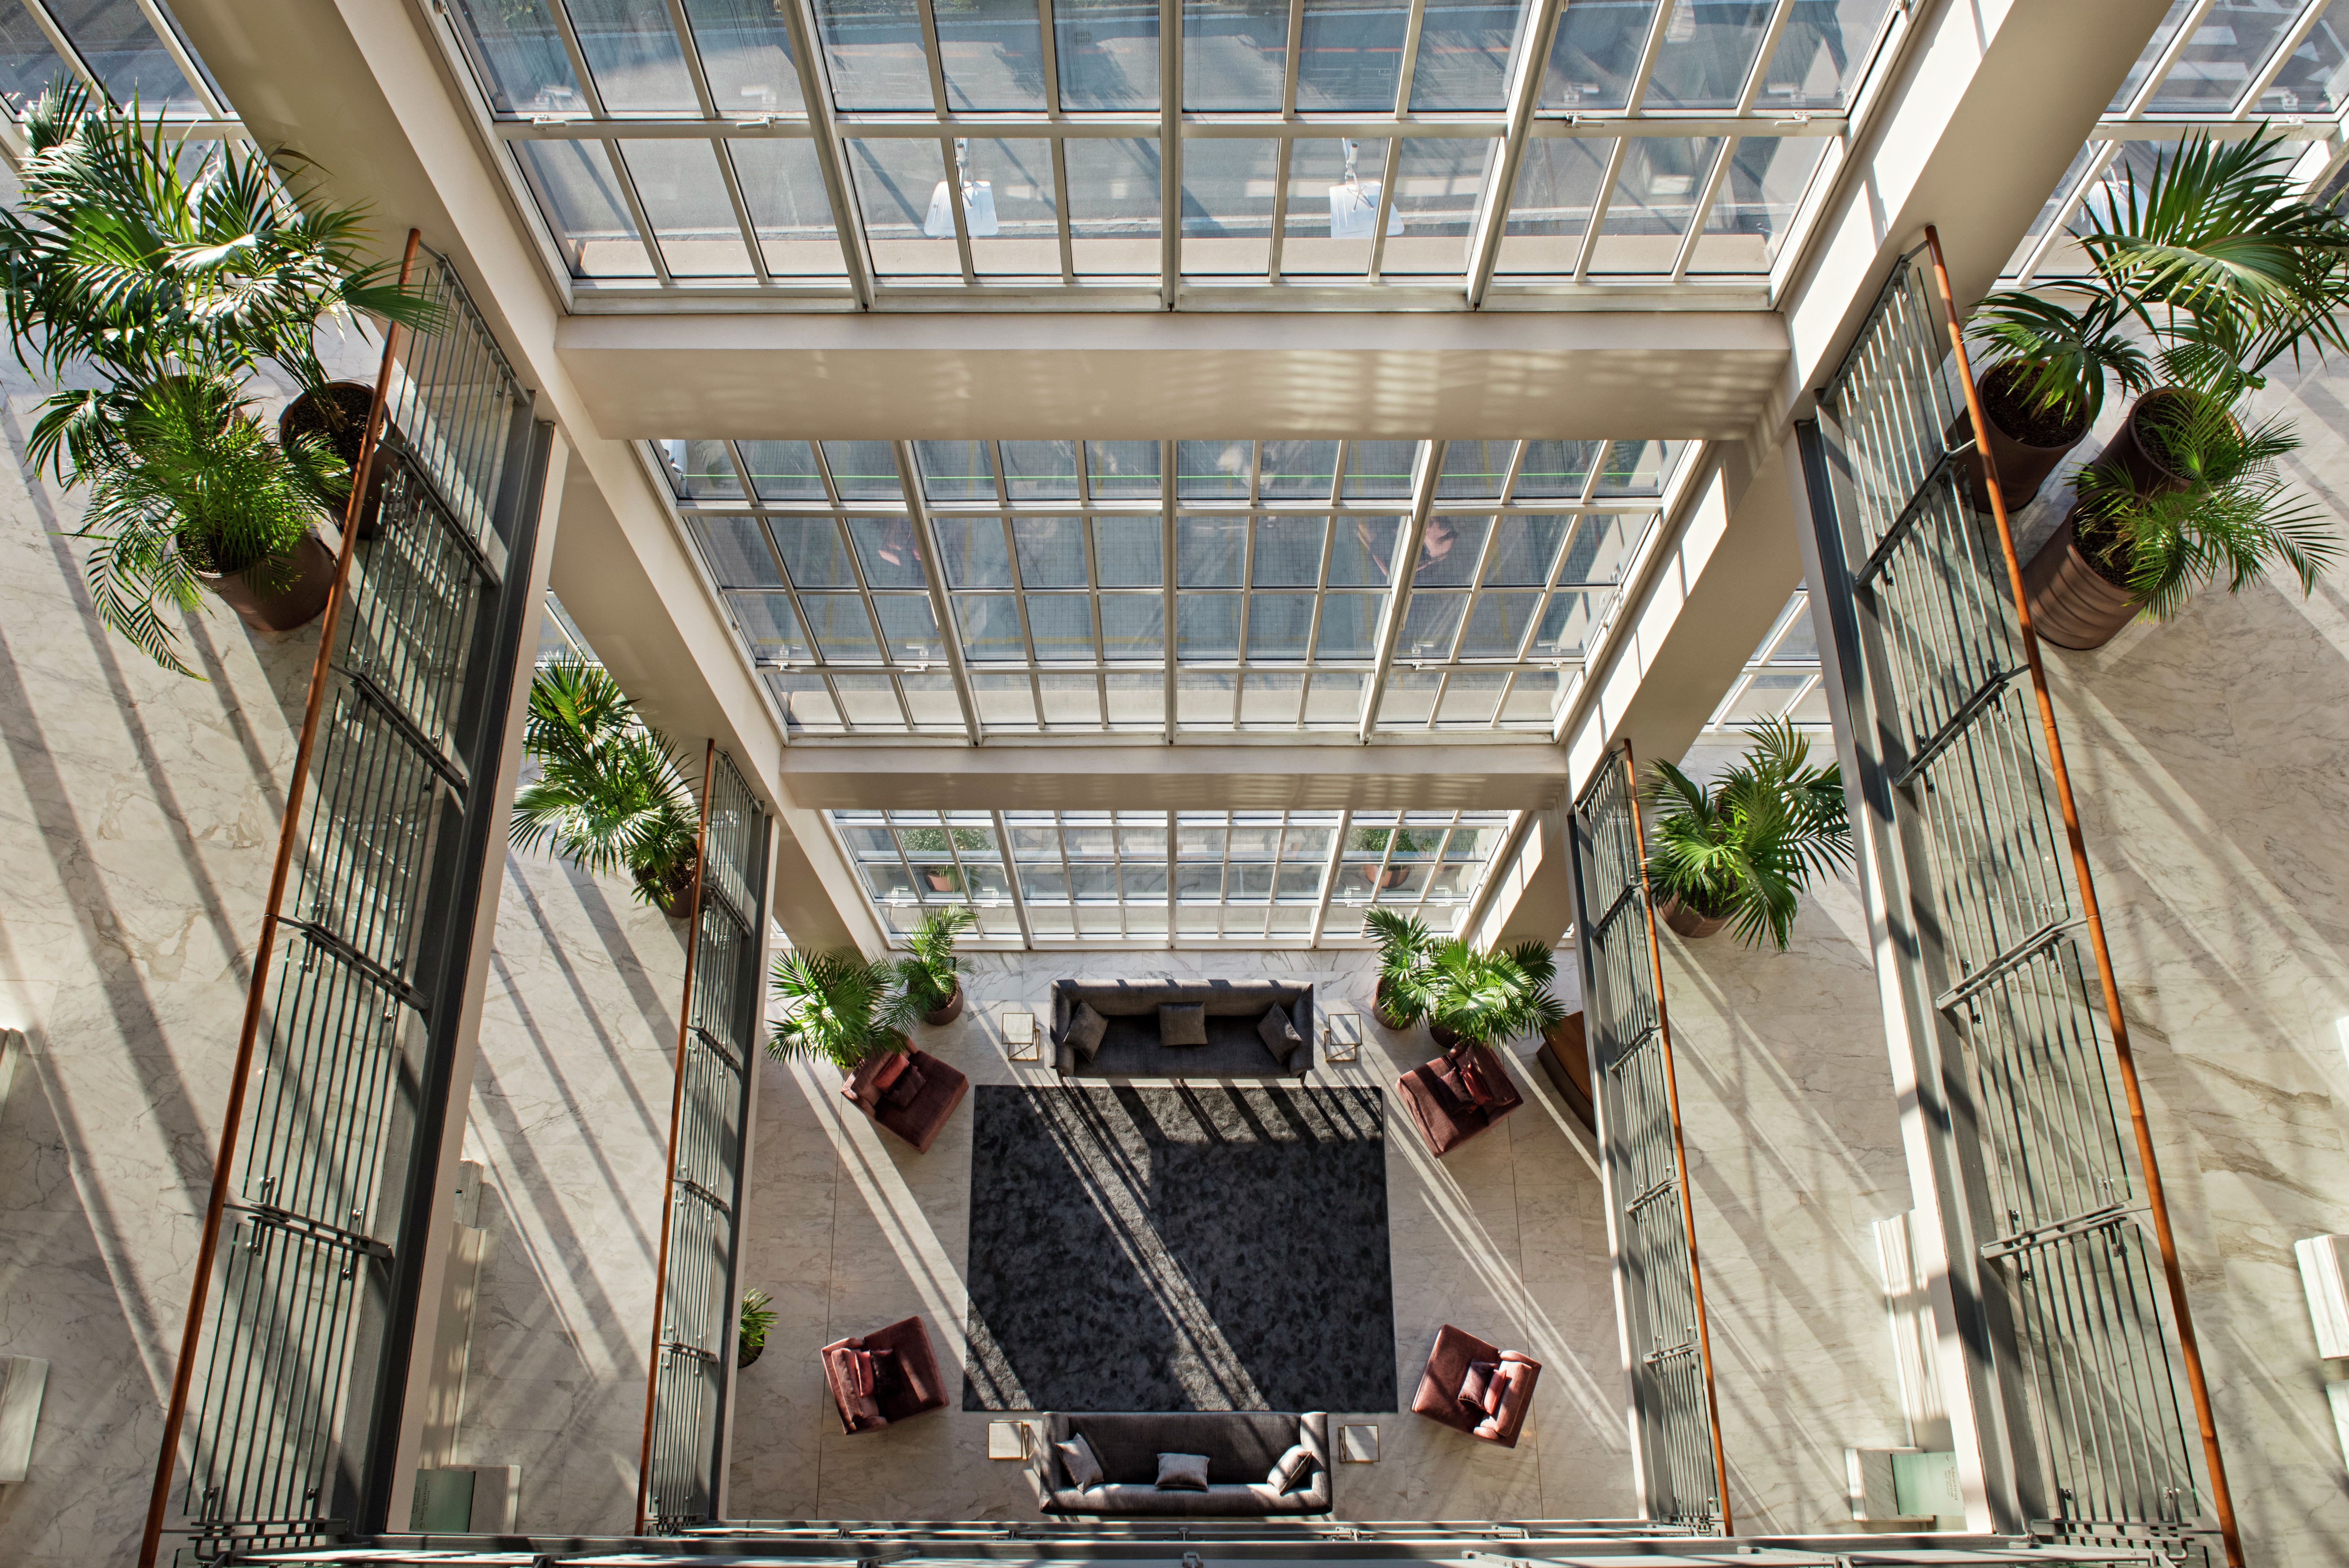 Overhead View of Lobby Seating in Atrium with Terrance and Floor to Ceiling Windows